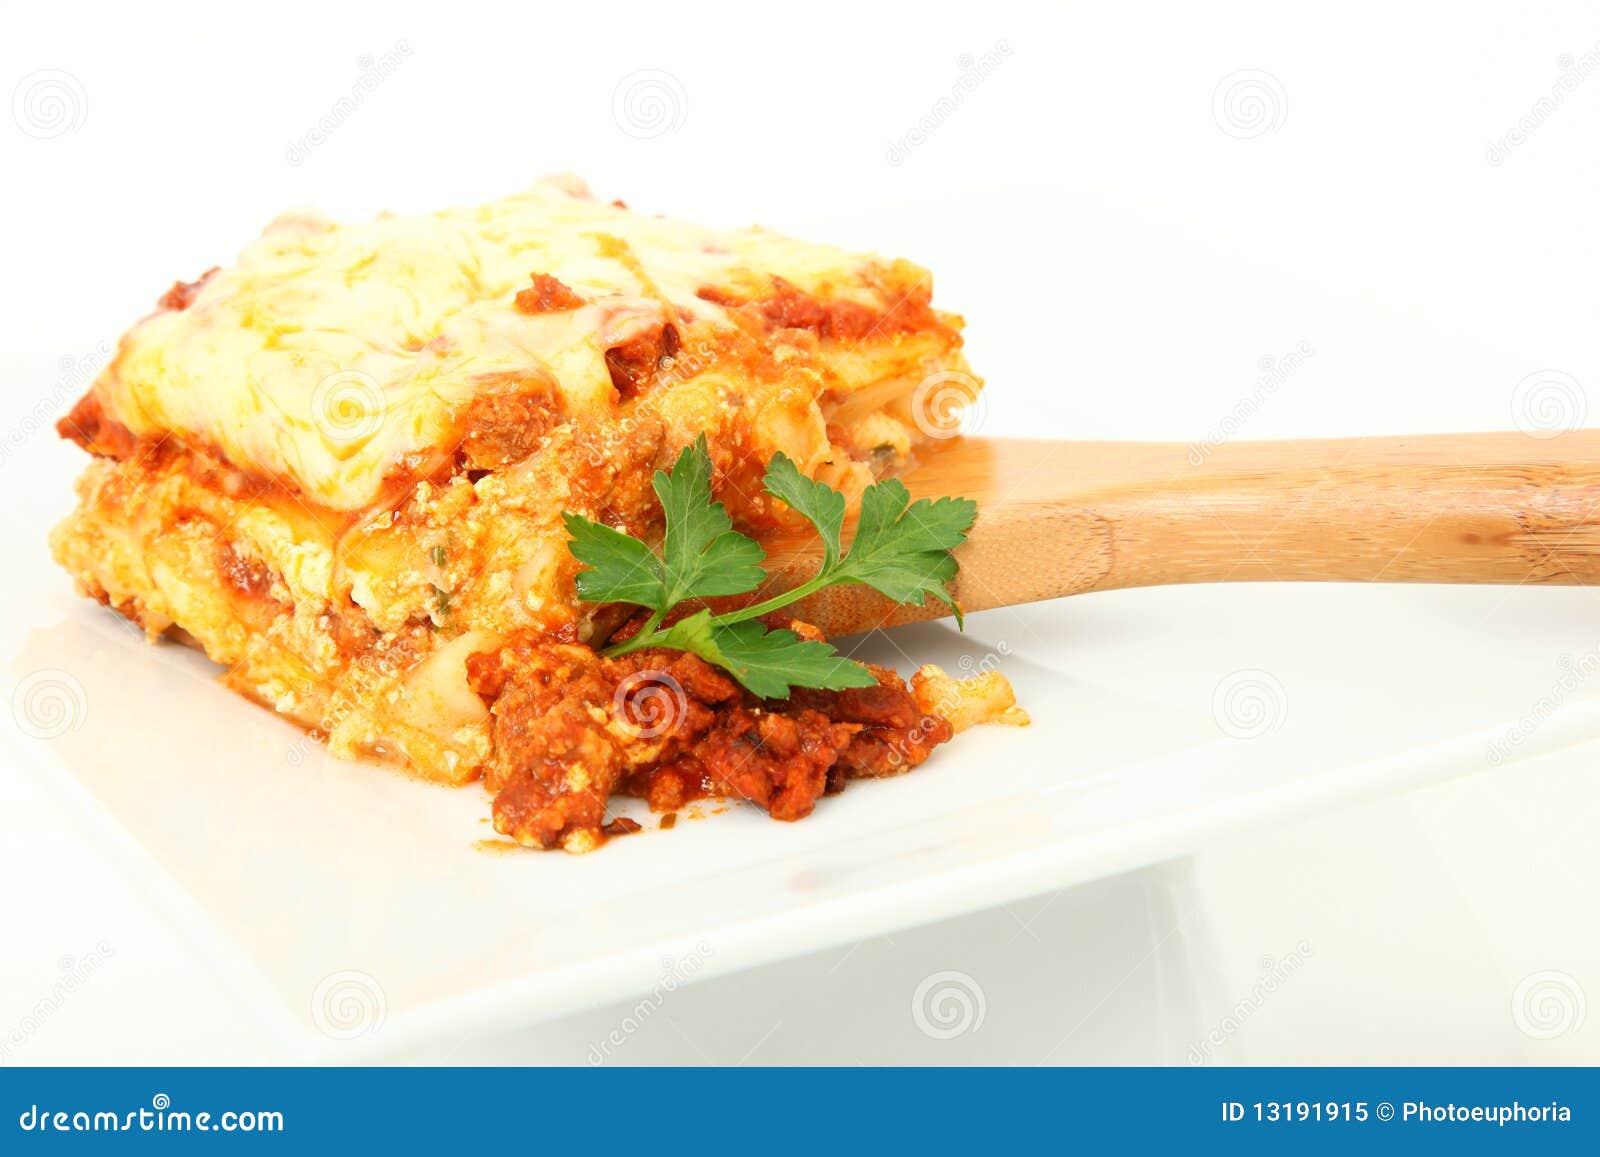 Lasagna Portion on Serving Spoon Stock Image - Image of lasagne ...